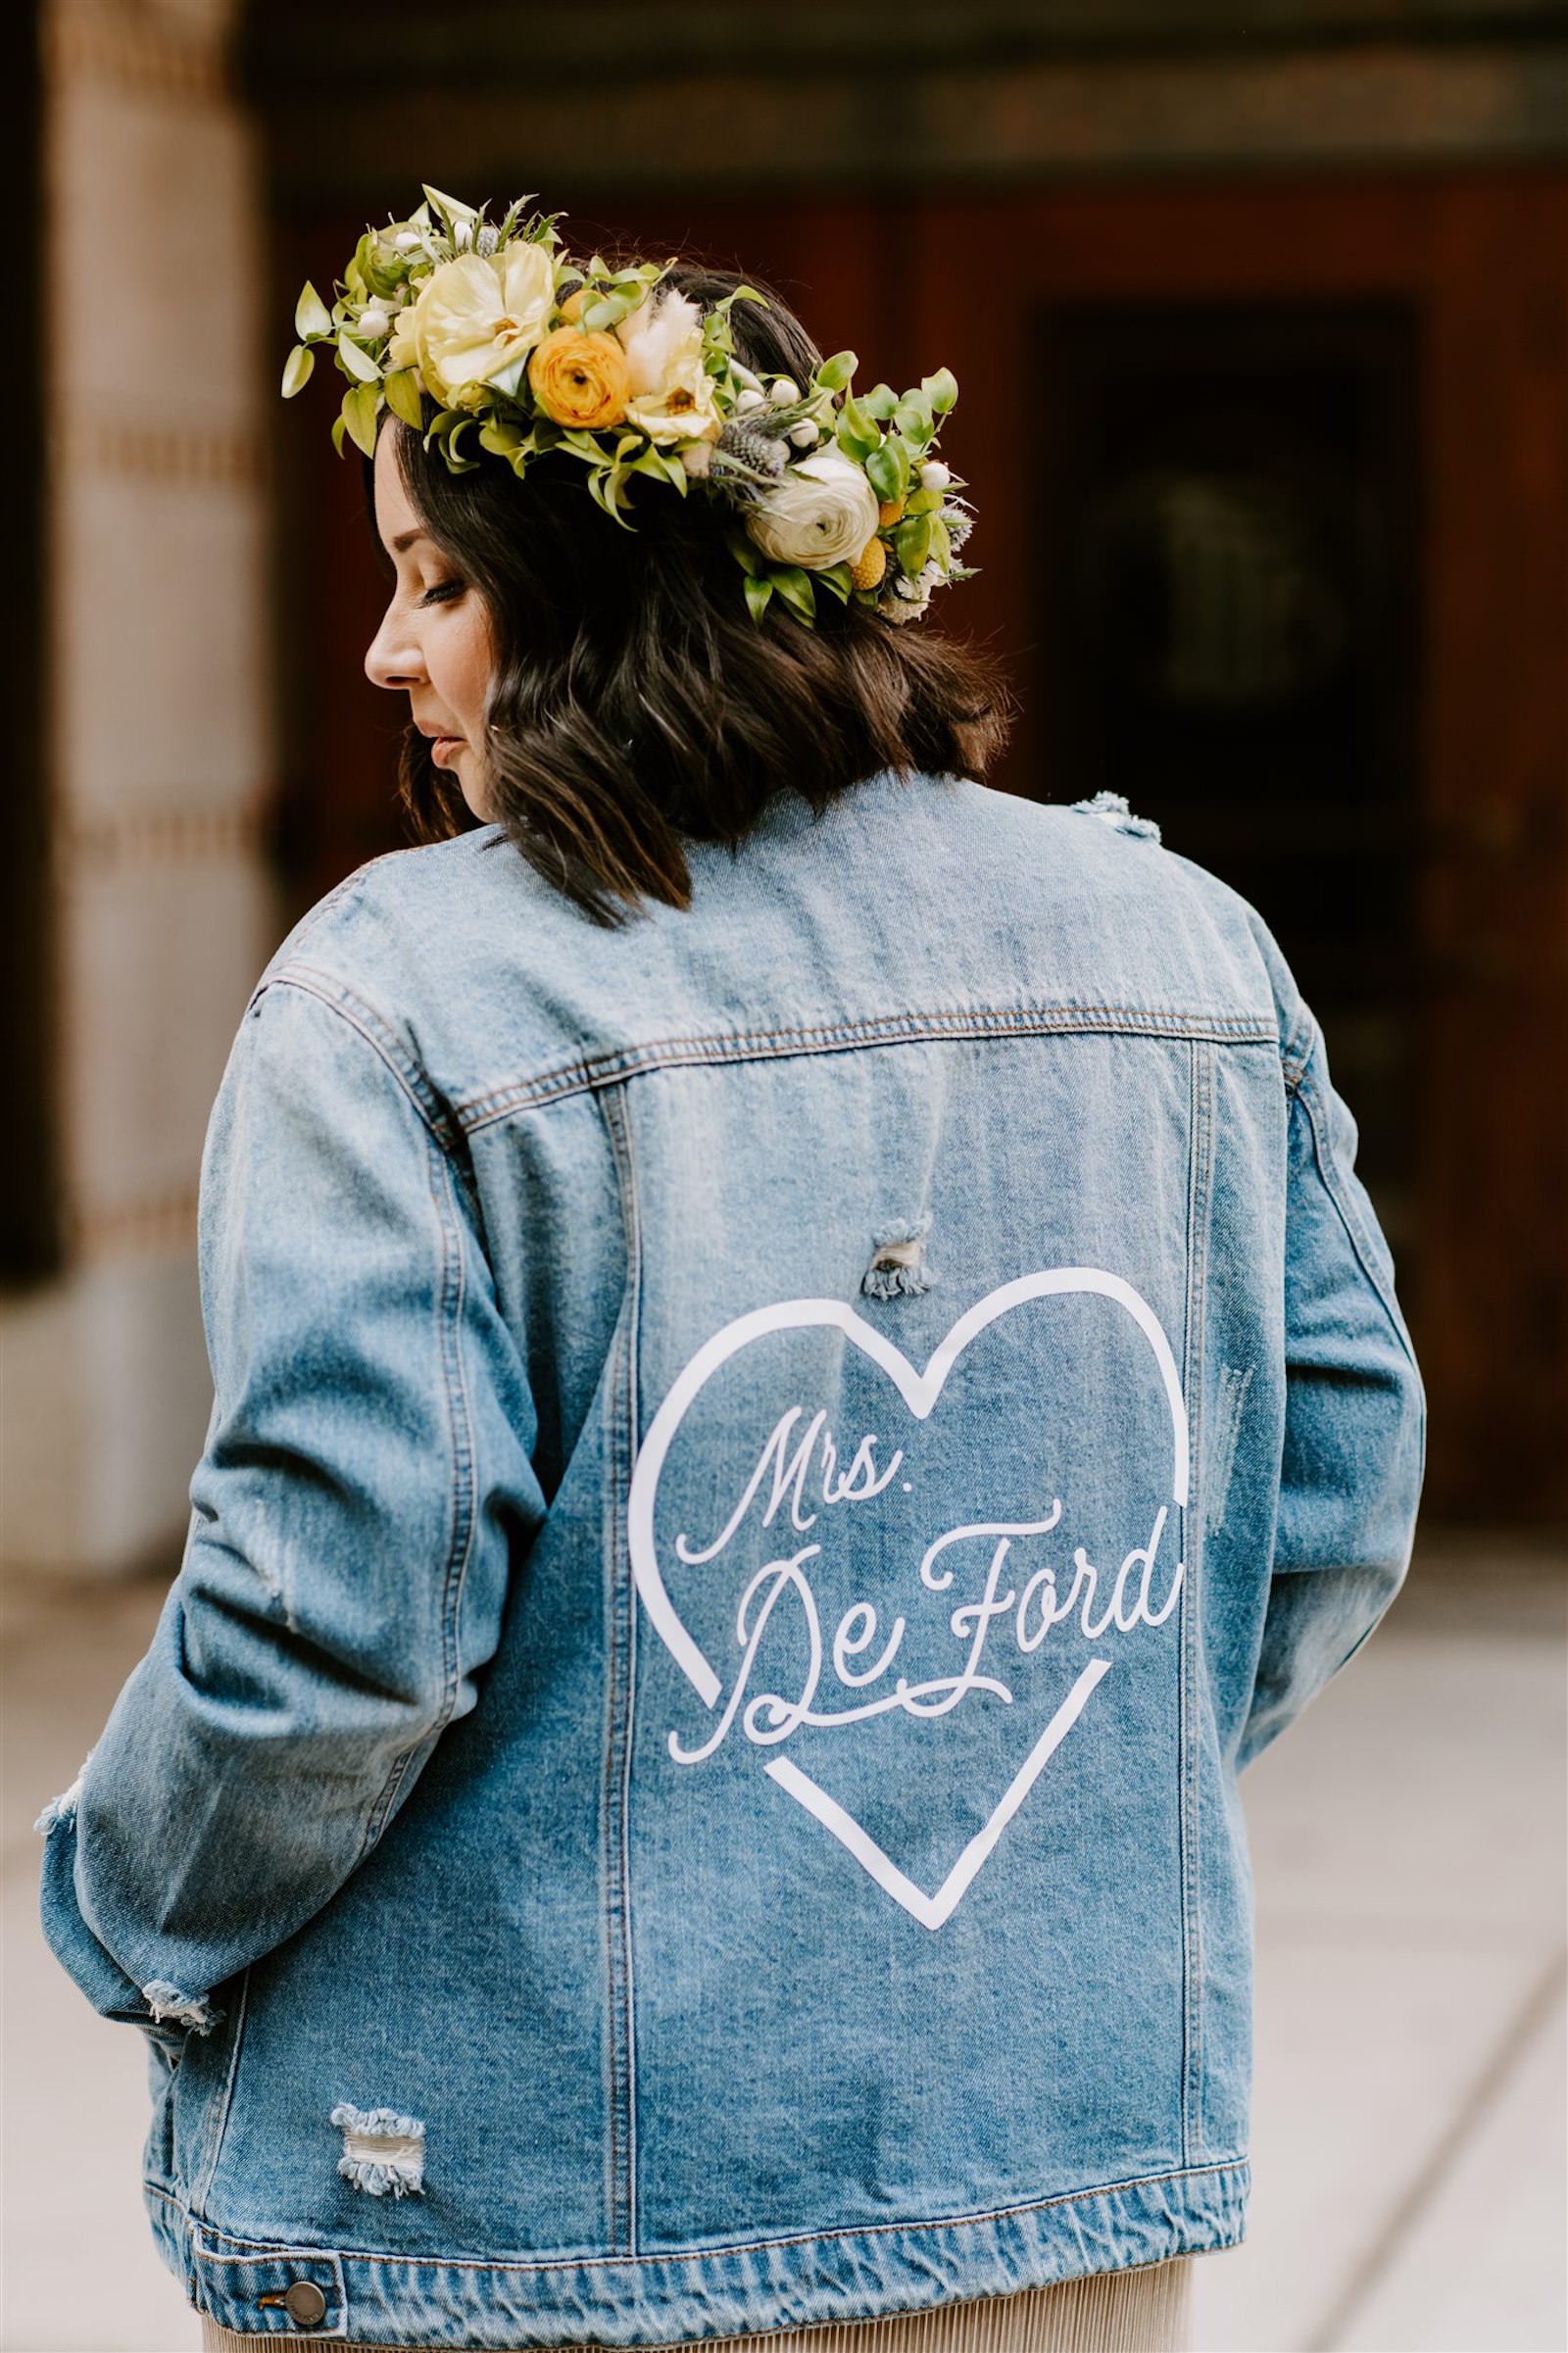 Bride in Custom Mrs. Jean Jacket Wedding Portrait with Floral Crown | Tampa Florida Wedding Photographer Regina as the Photographer